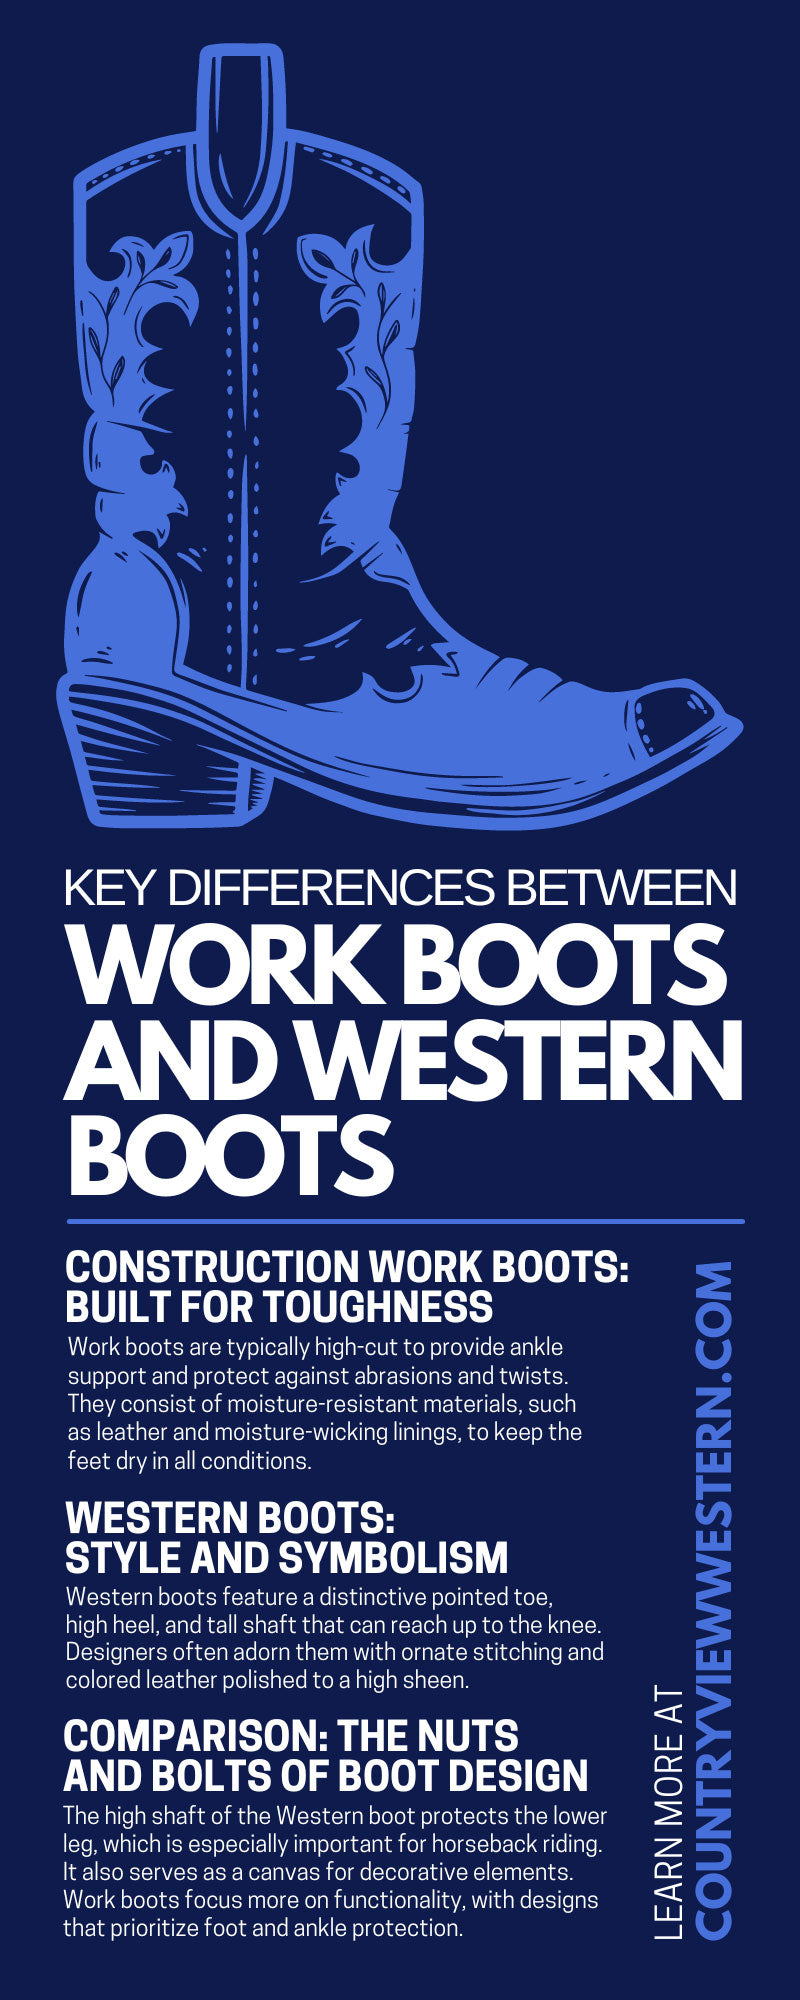 Key Differences Between Work Boots and Western Boots